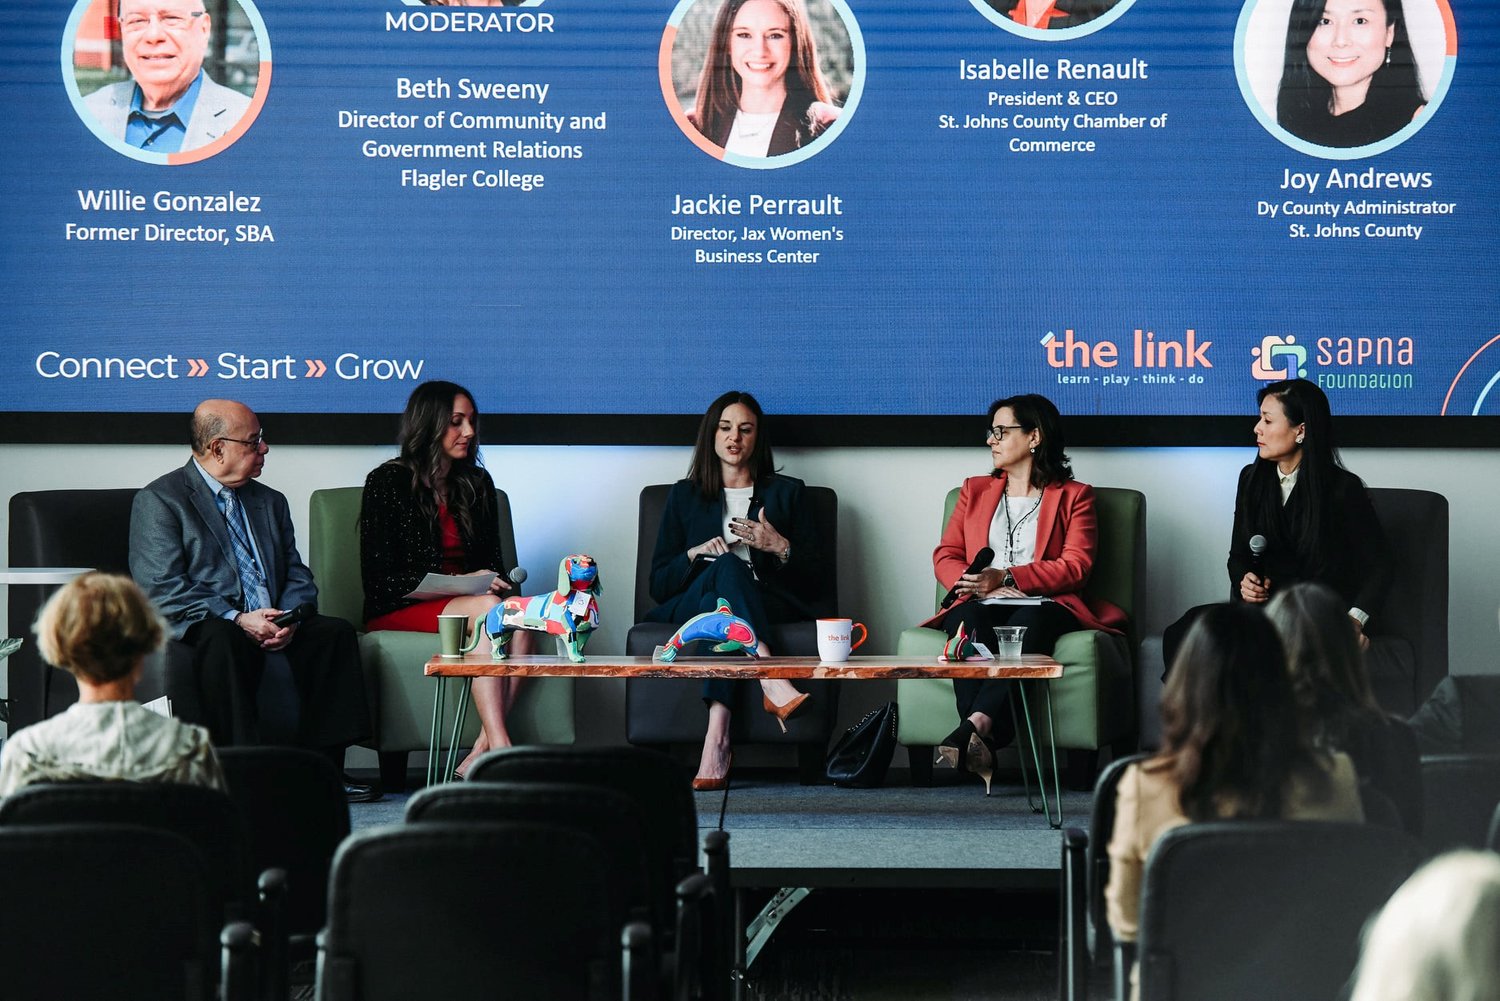 EnterCircle 2021 featured a number of presentations and discussions, including a focus on women who are professionals.